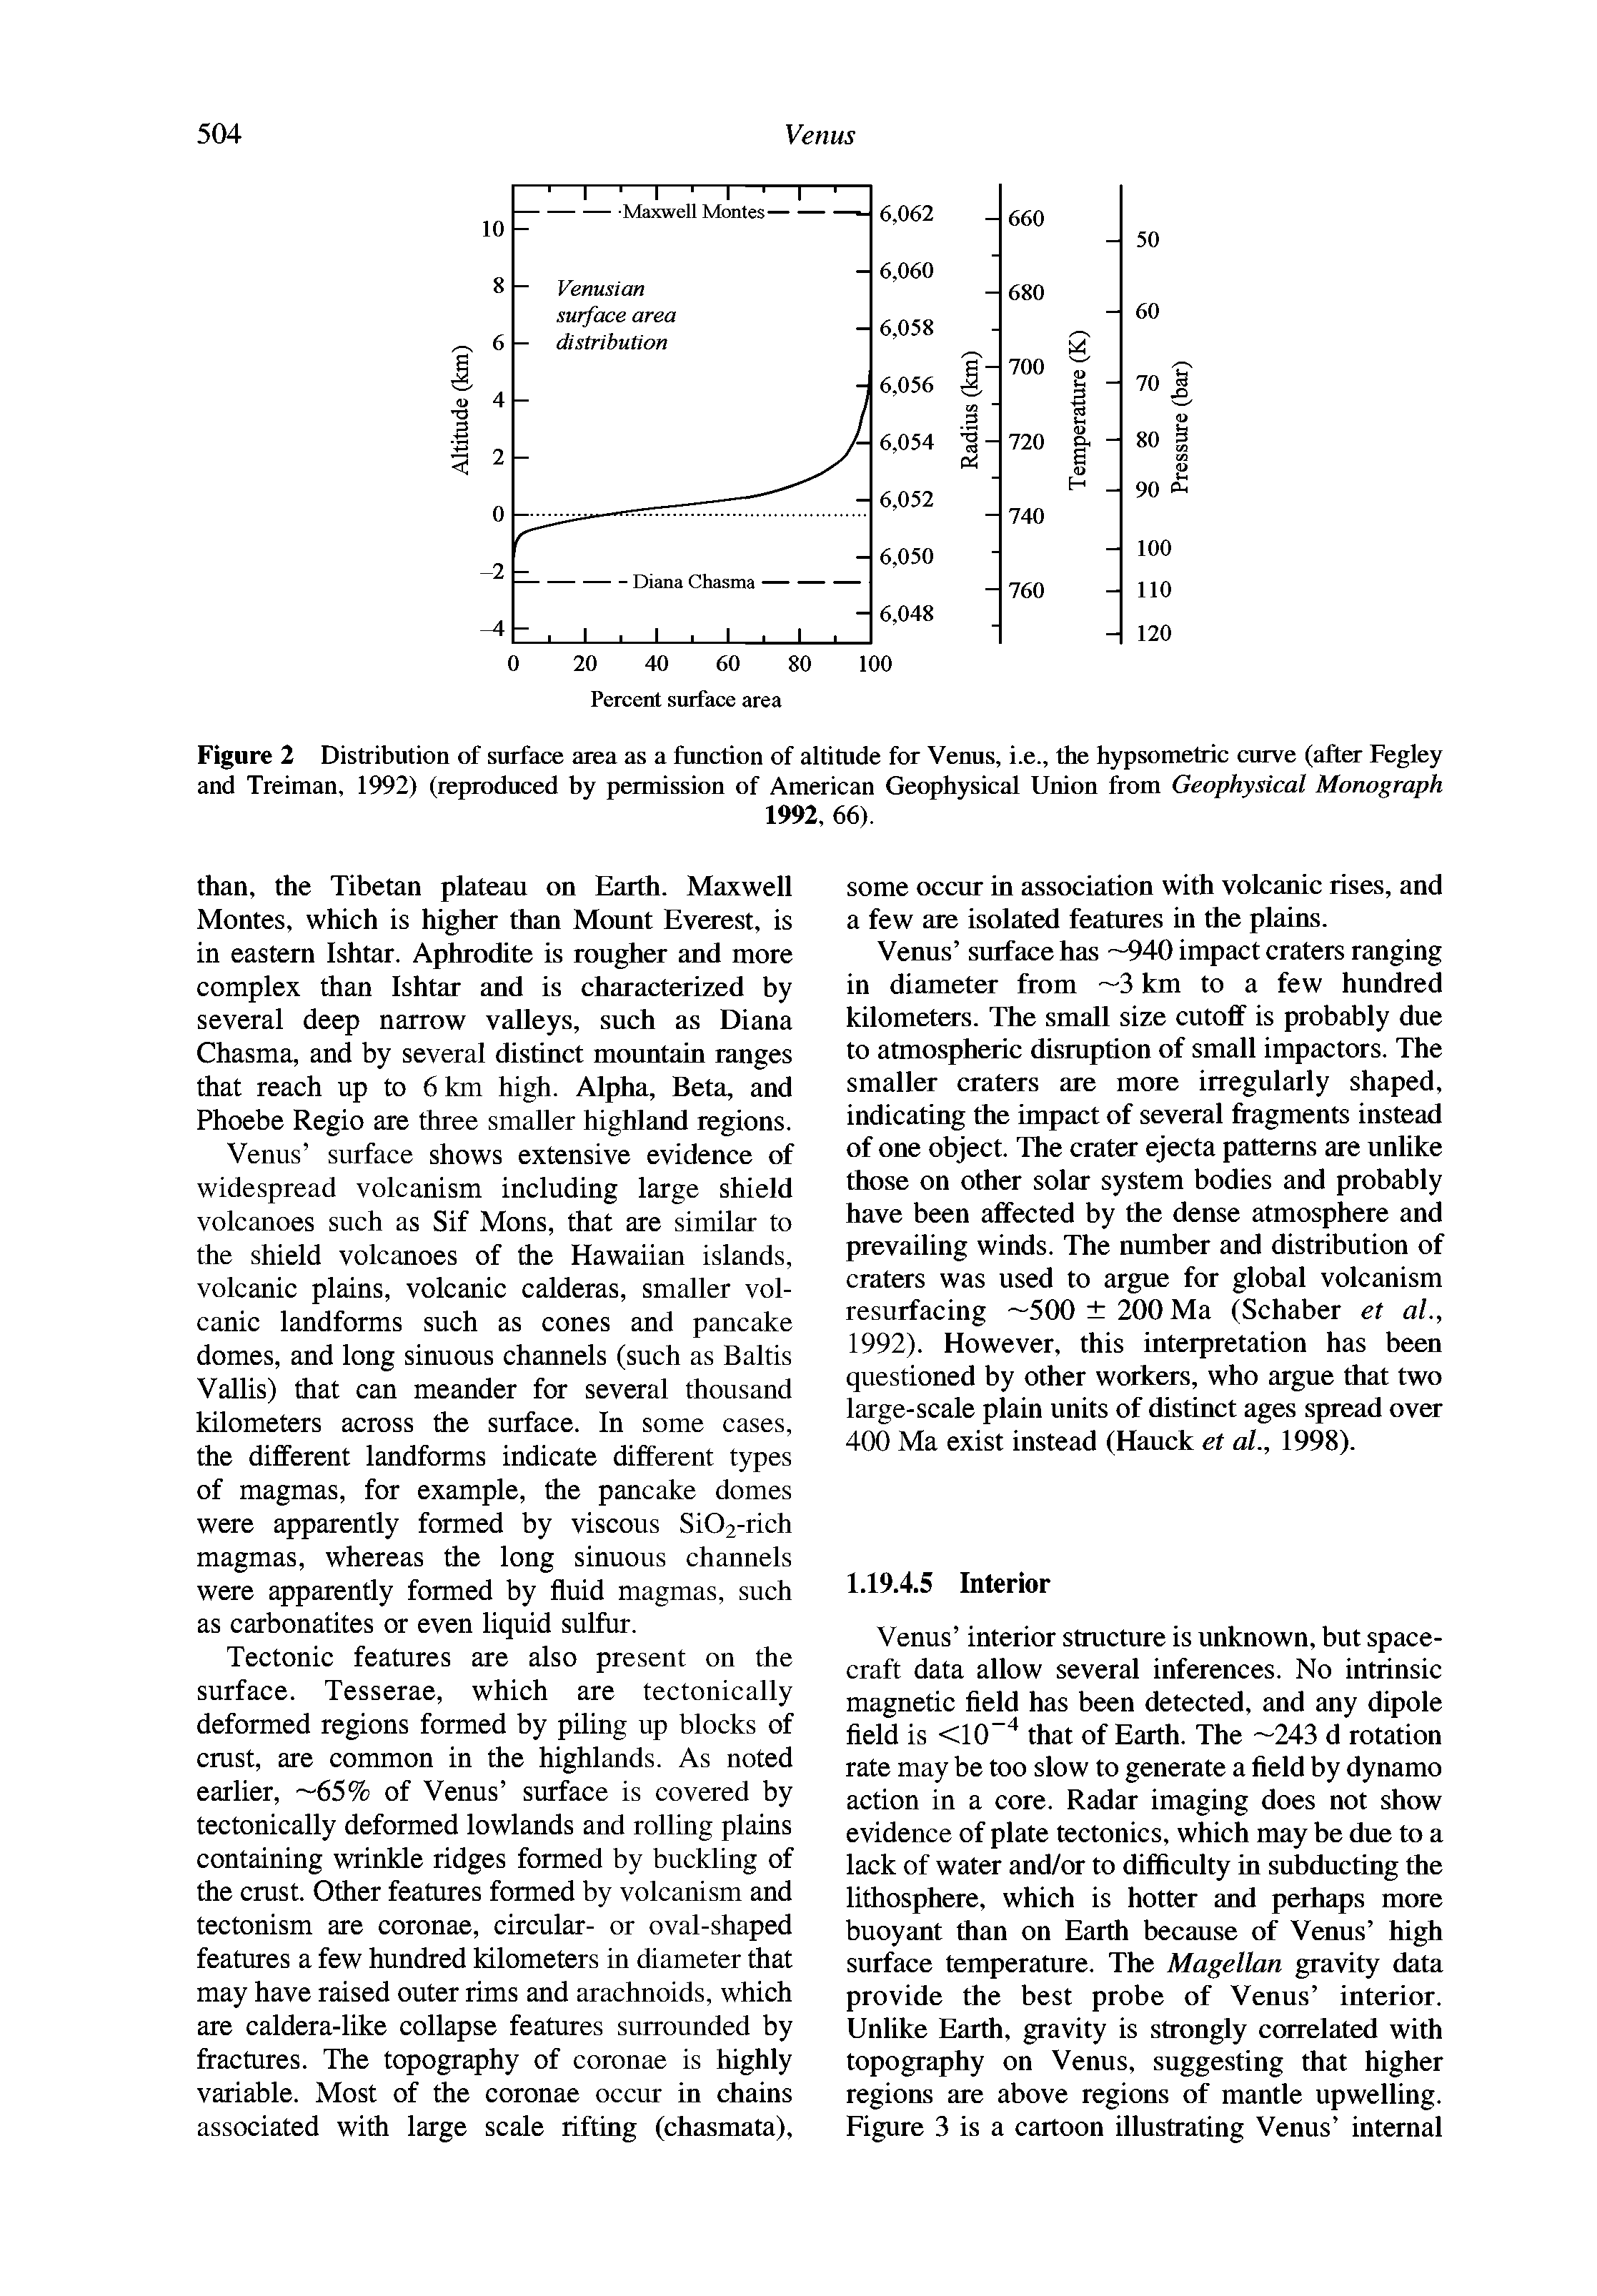 Figure 2 Distribution of surface area as a function of altitude for Venus, i.e., the hypsometric curve (after Fegley and Treiman, 1992) (reproduced by permission of American Geophysical Union from Geophysical Monograph...